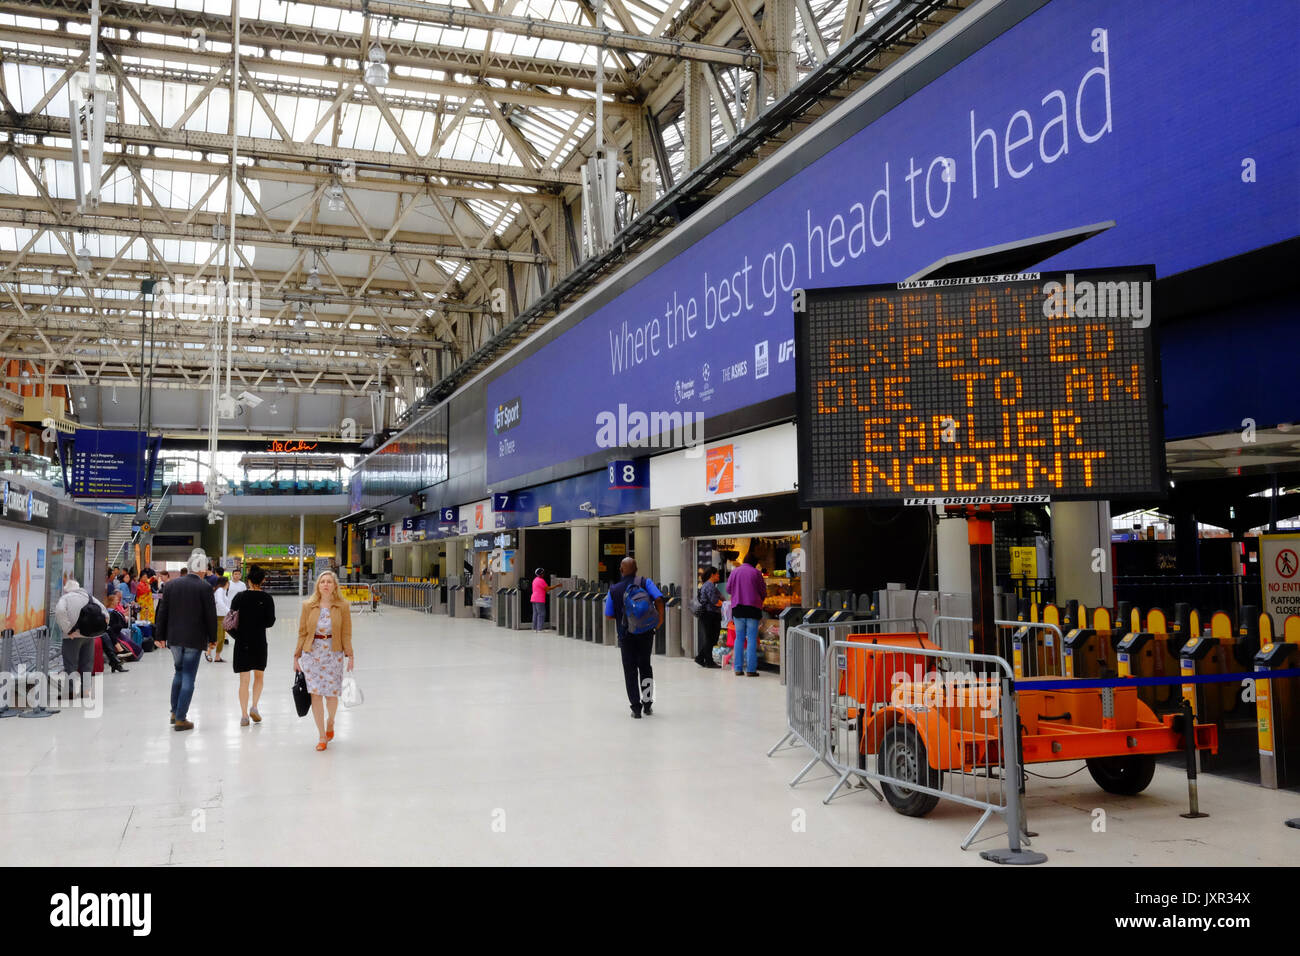 Waterloo Station London the day a derailment added to the chaos caused by the improvement works that have closed platforms. Taken on 16th August 2017. Stock Photo